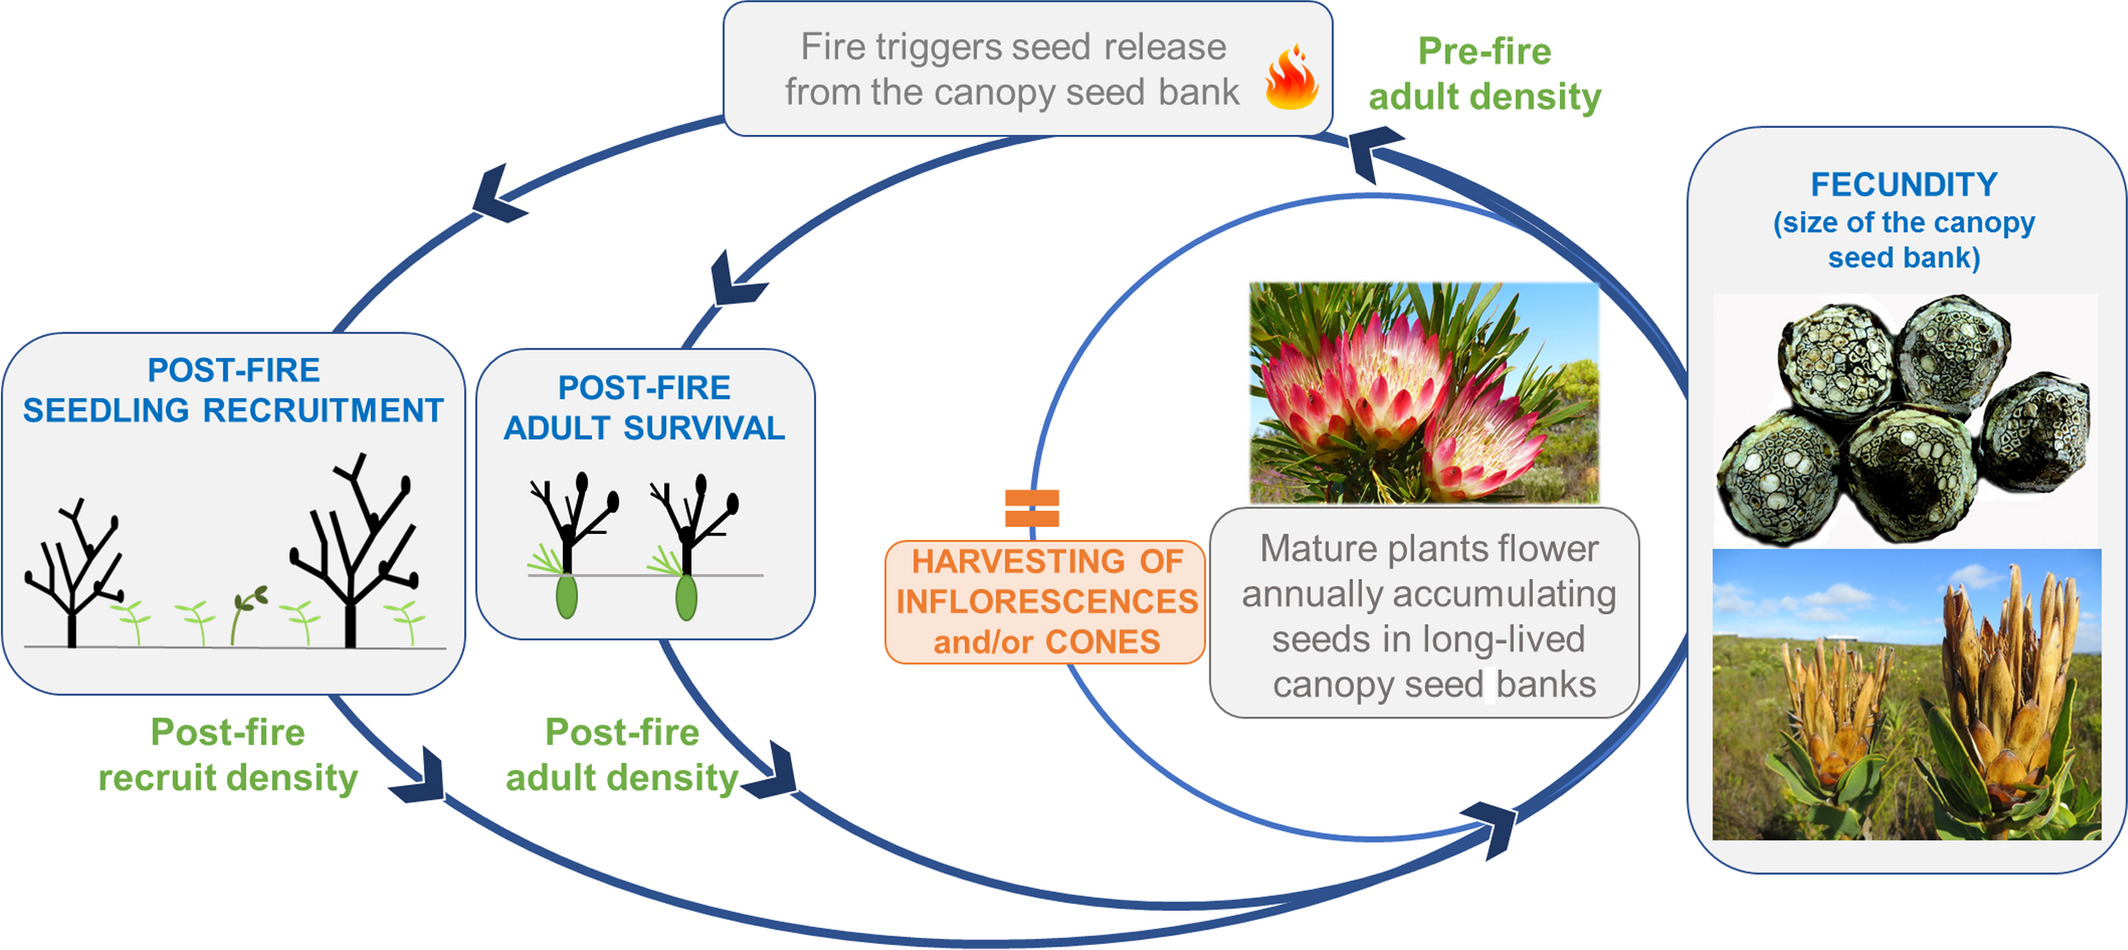 The fire-driven life-cycle of Fynbos Proteaceae species, including harvesting, taken from [@Treurnicht2021]. Population size/stability are determined by ***key demographic rates*** of adult **fecundity** (size of the canopy seed bank), post-fire seedling **recruitment** and adult fire **survival** (blue–grey boxes). These rates are affected in various ways by environmental conditions, life-history traits, density dependence, the timing, intensity and severity of fire, wildflower harvesting, etc